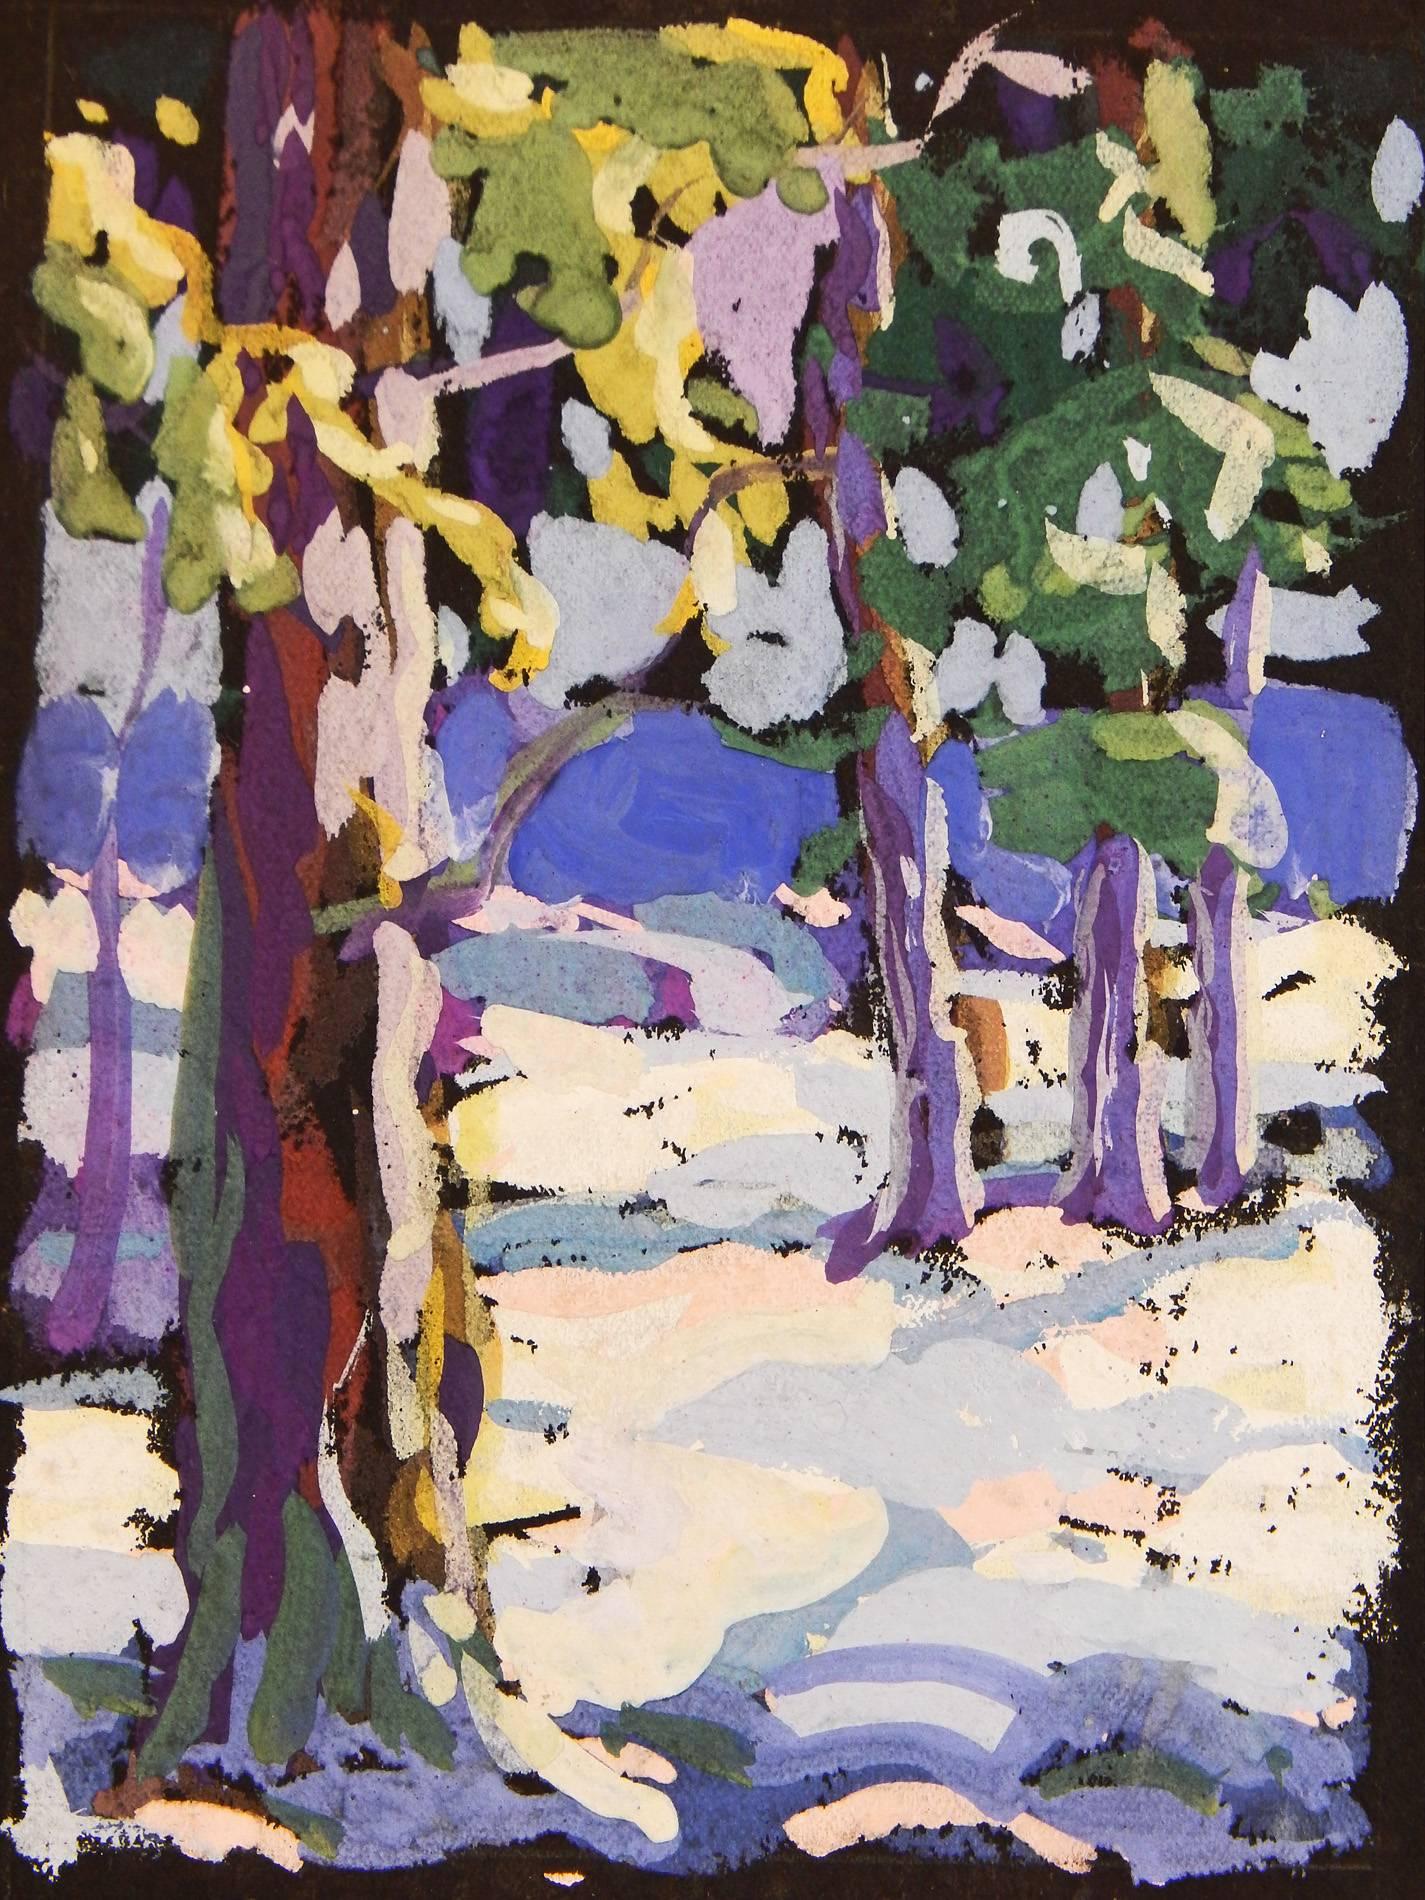 One of the loveliest and most beautiful stylized snow scenes we have seen, this impressionistic woodland view with a blanket of snow is full of entrancing color purple, lilac, lavender, pink and lemon yellow. The painter, M. H. Forster, used gouache